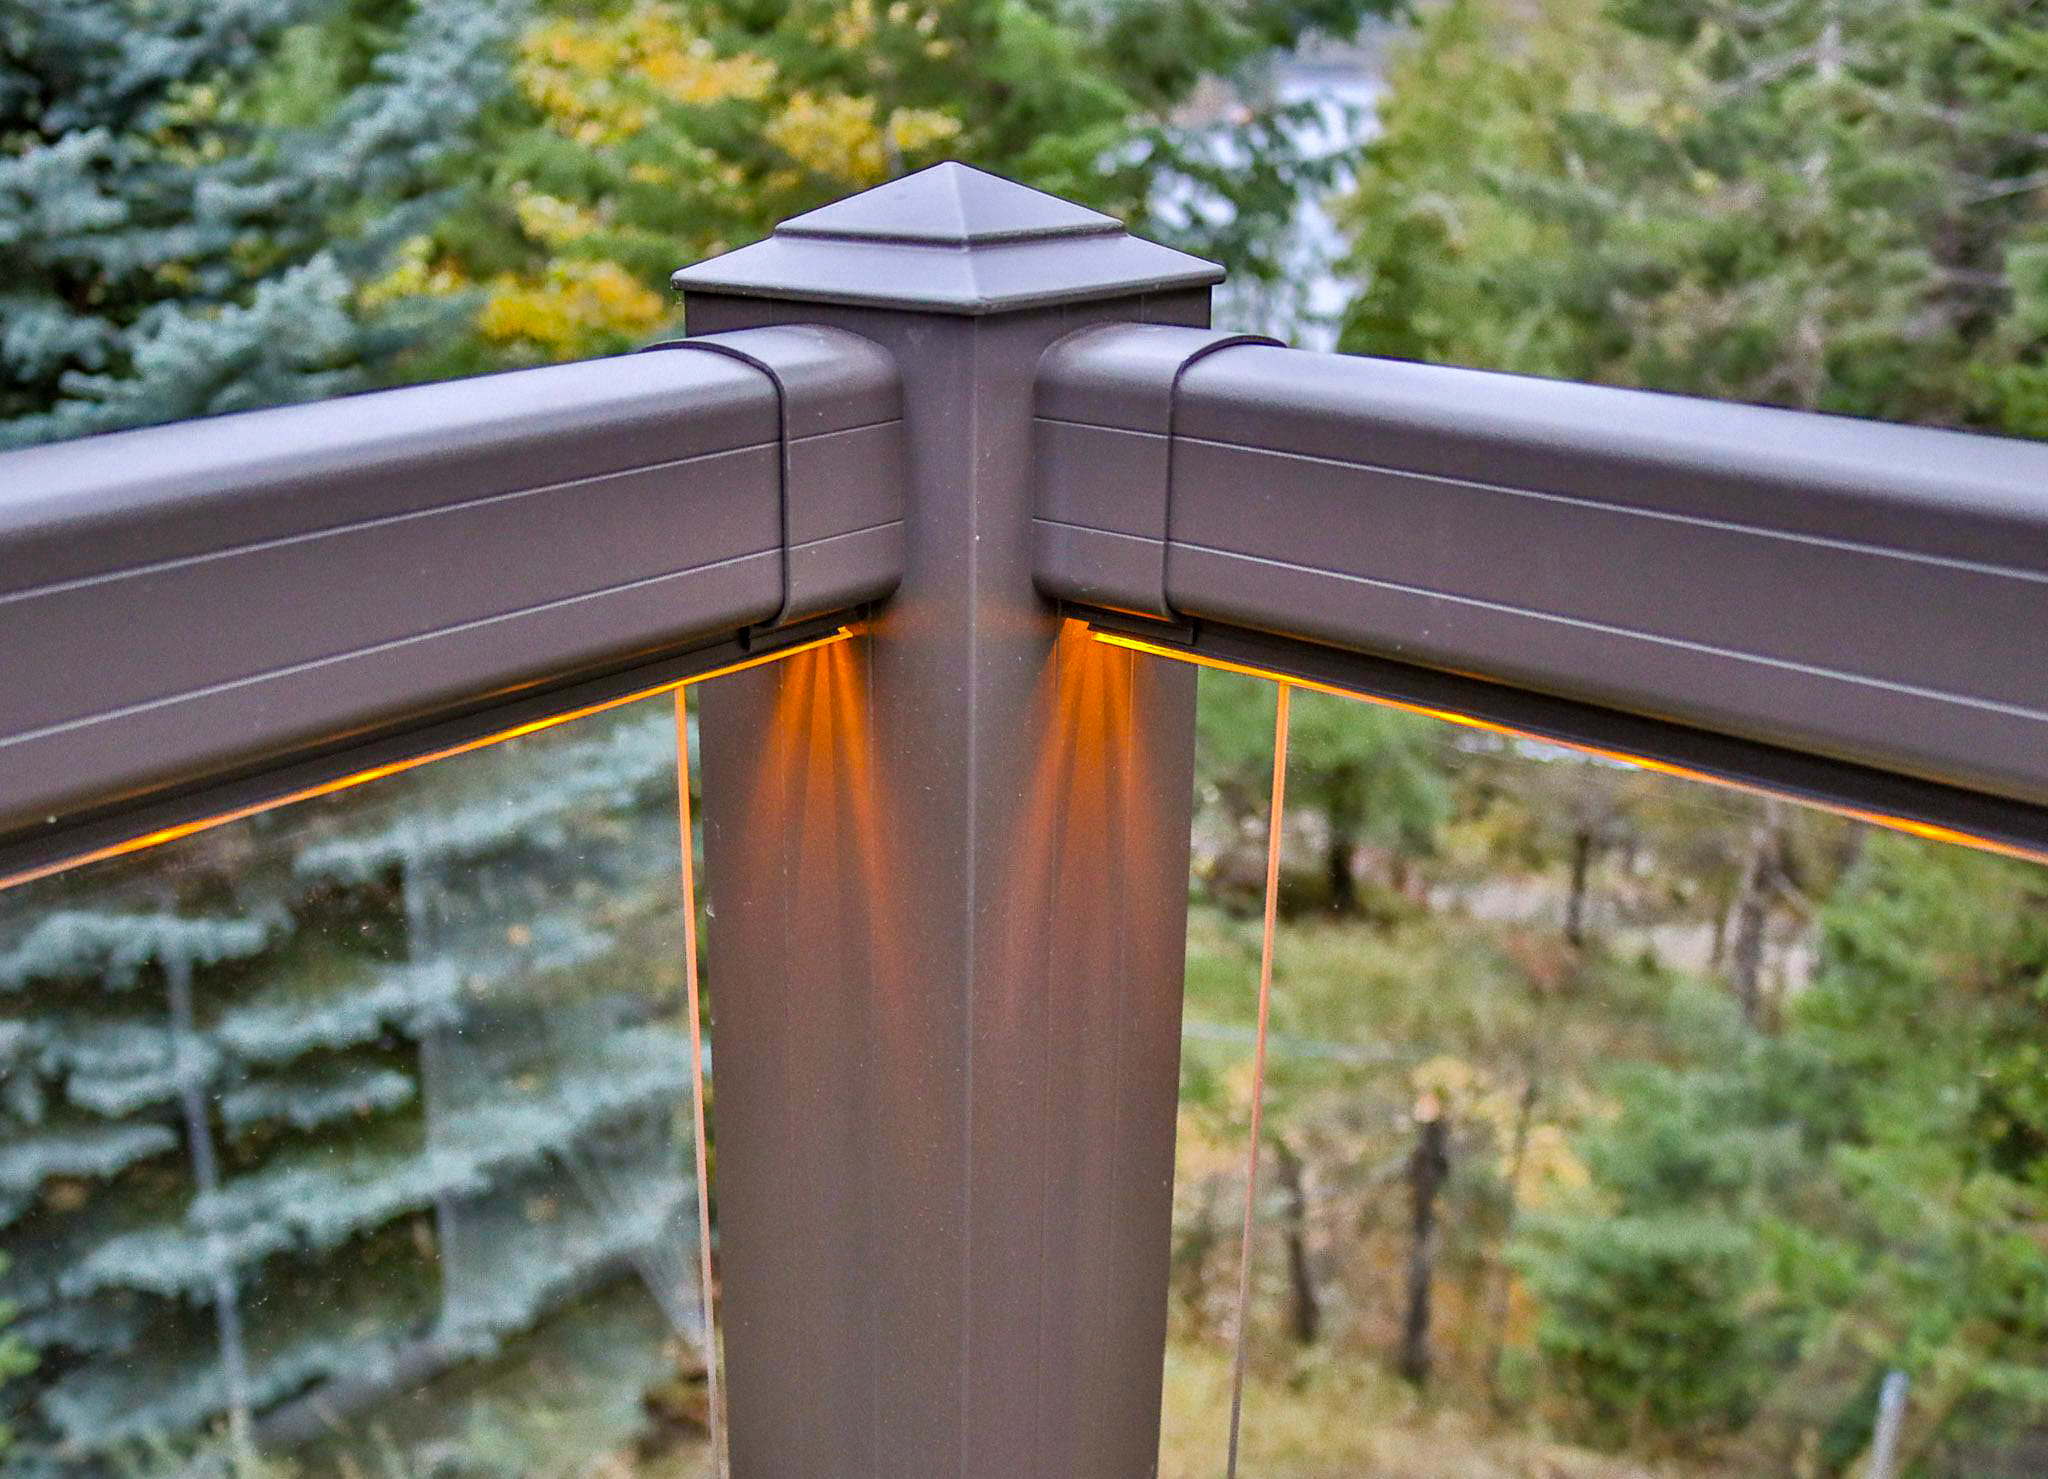 Fancy gold deck lighting with metal railing and glass